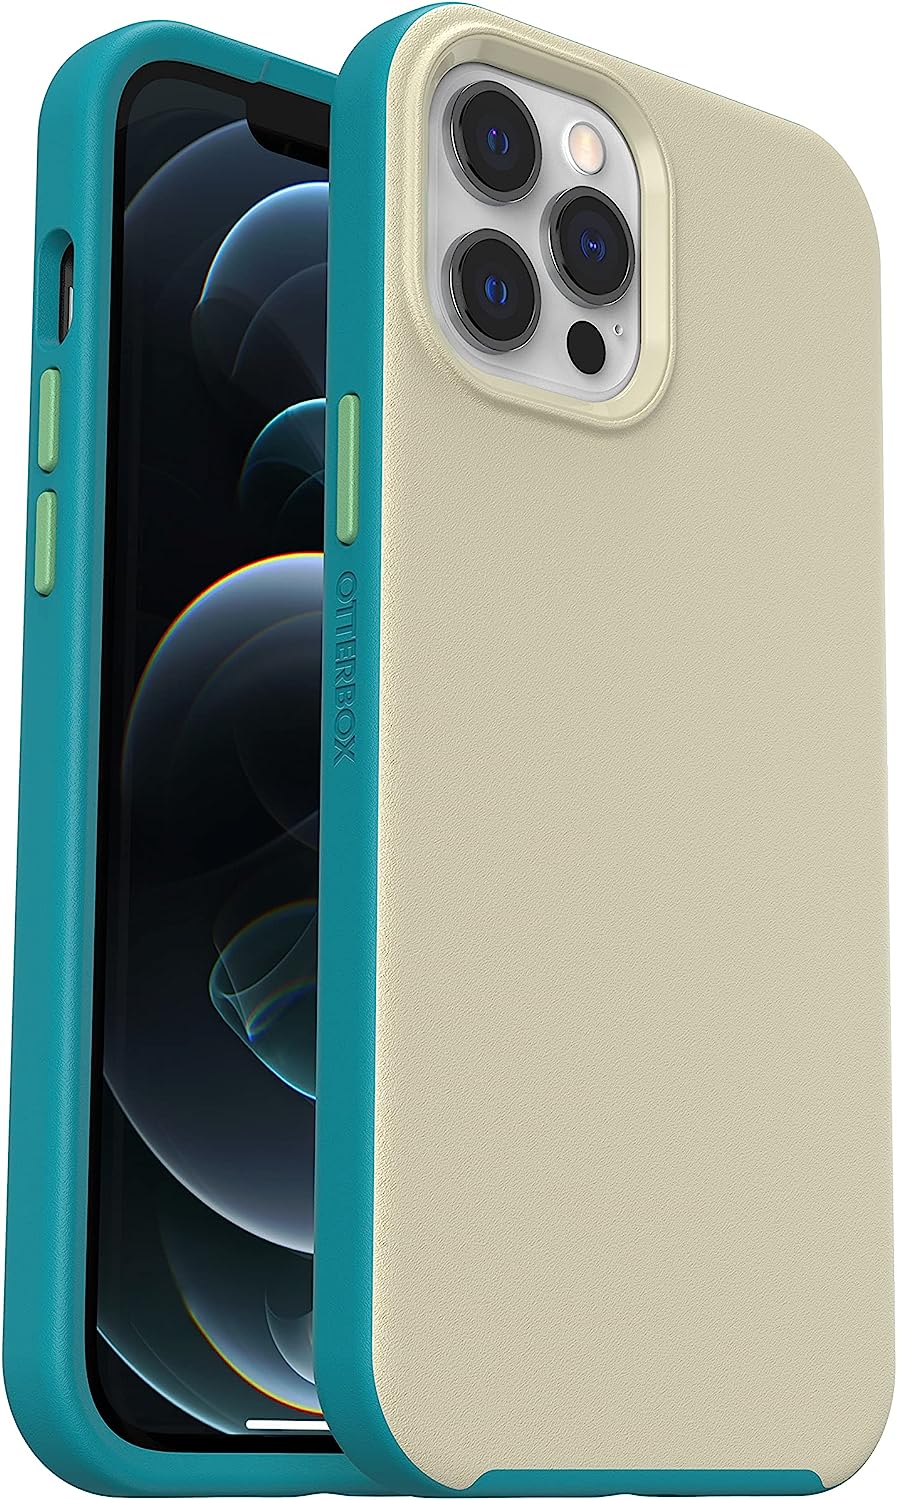 OtterBox Slim Series Case for iPhone 12 Pro Grey/Green RRP £29.99 CLEARANCE XL £24.99